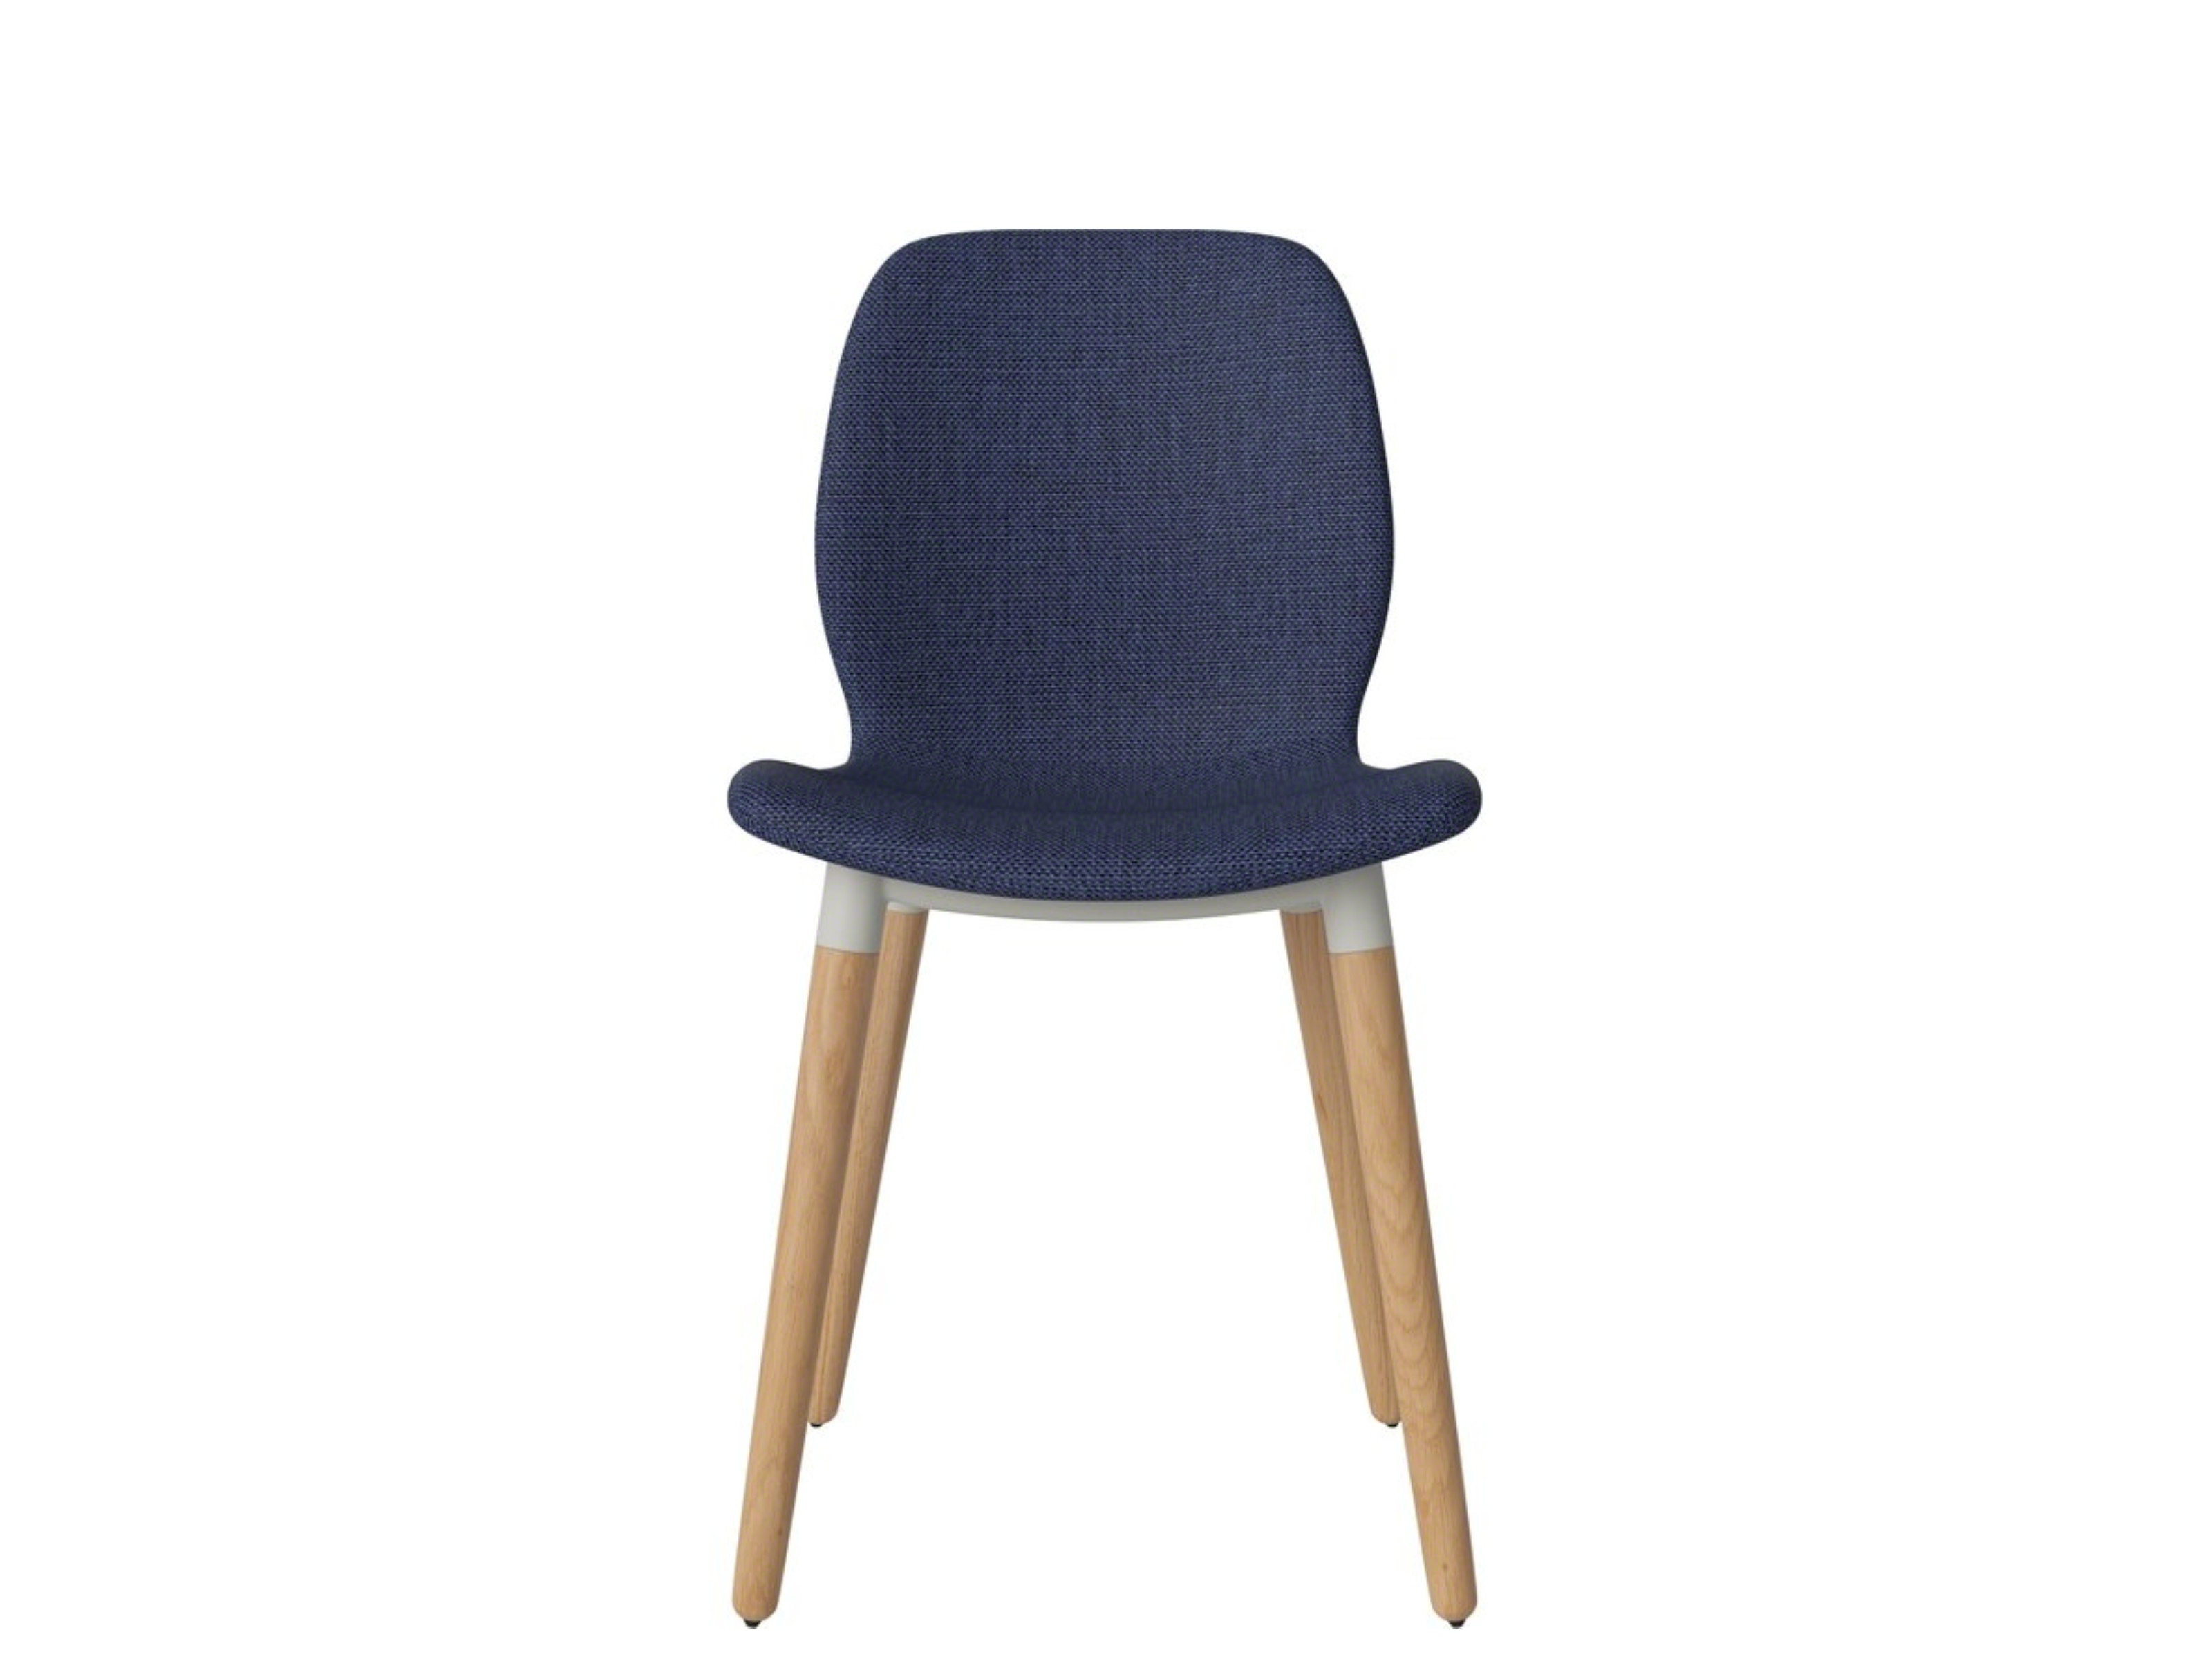 Seed chair-Upholstery/wood legs